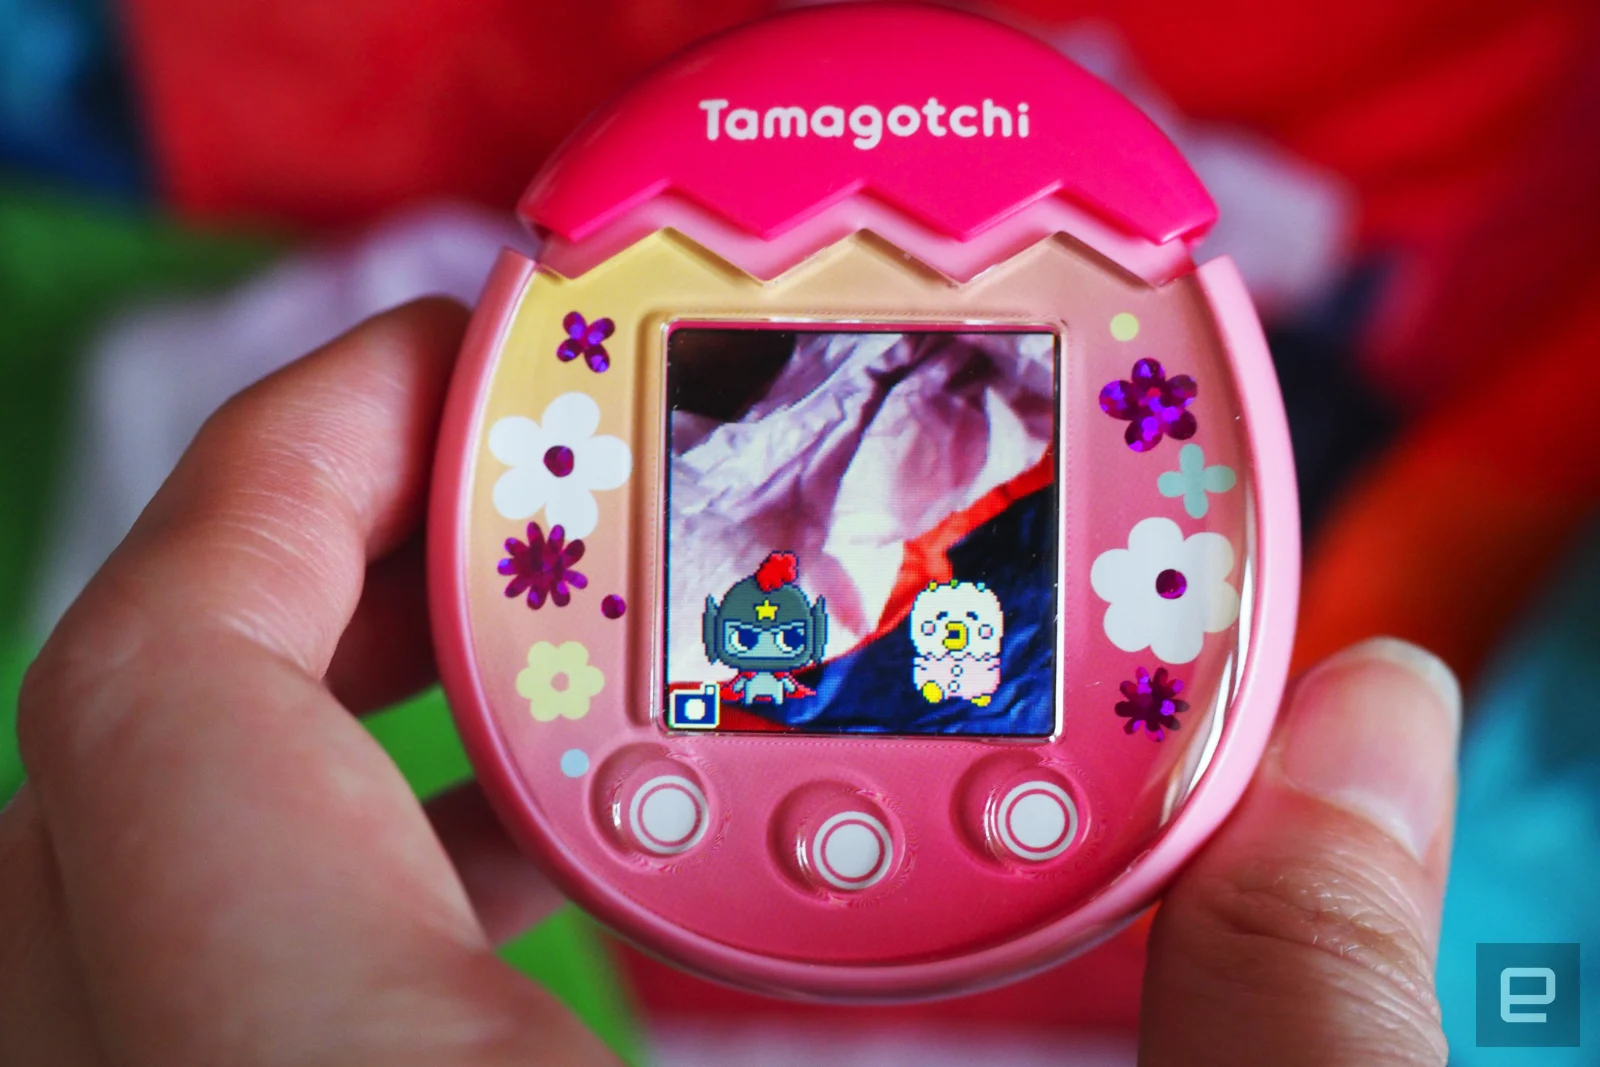 Vulkan sekvens Net My Tamagotchi Pix is drowning in poop and it's not my fault | Engadget